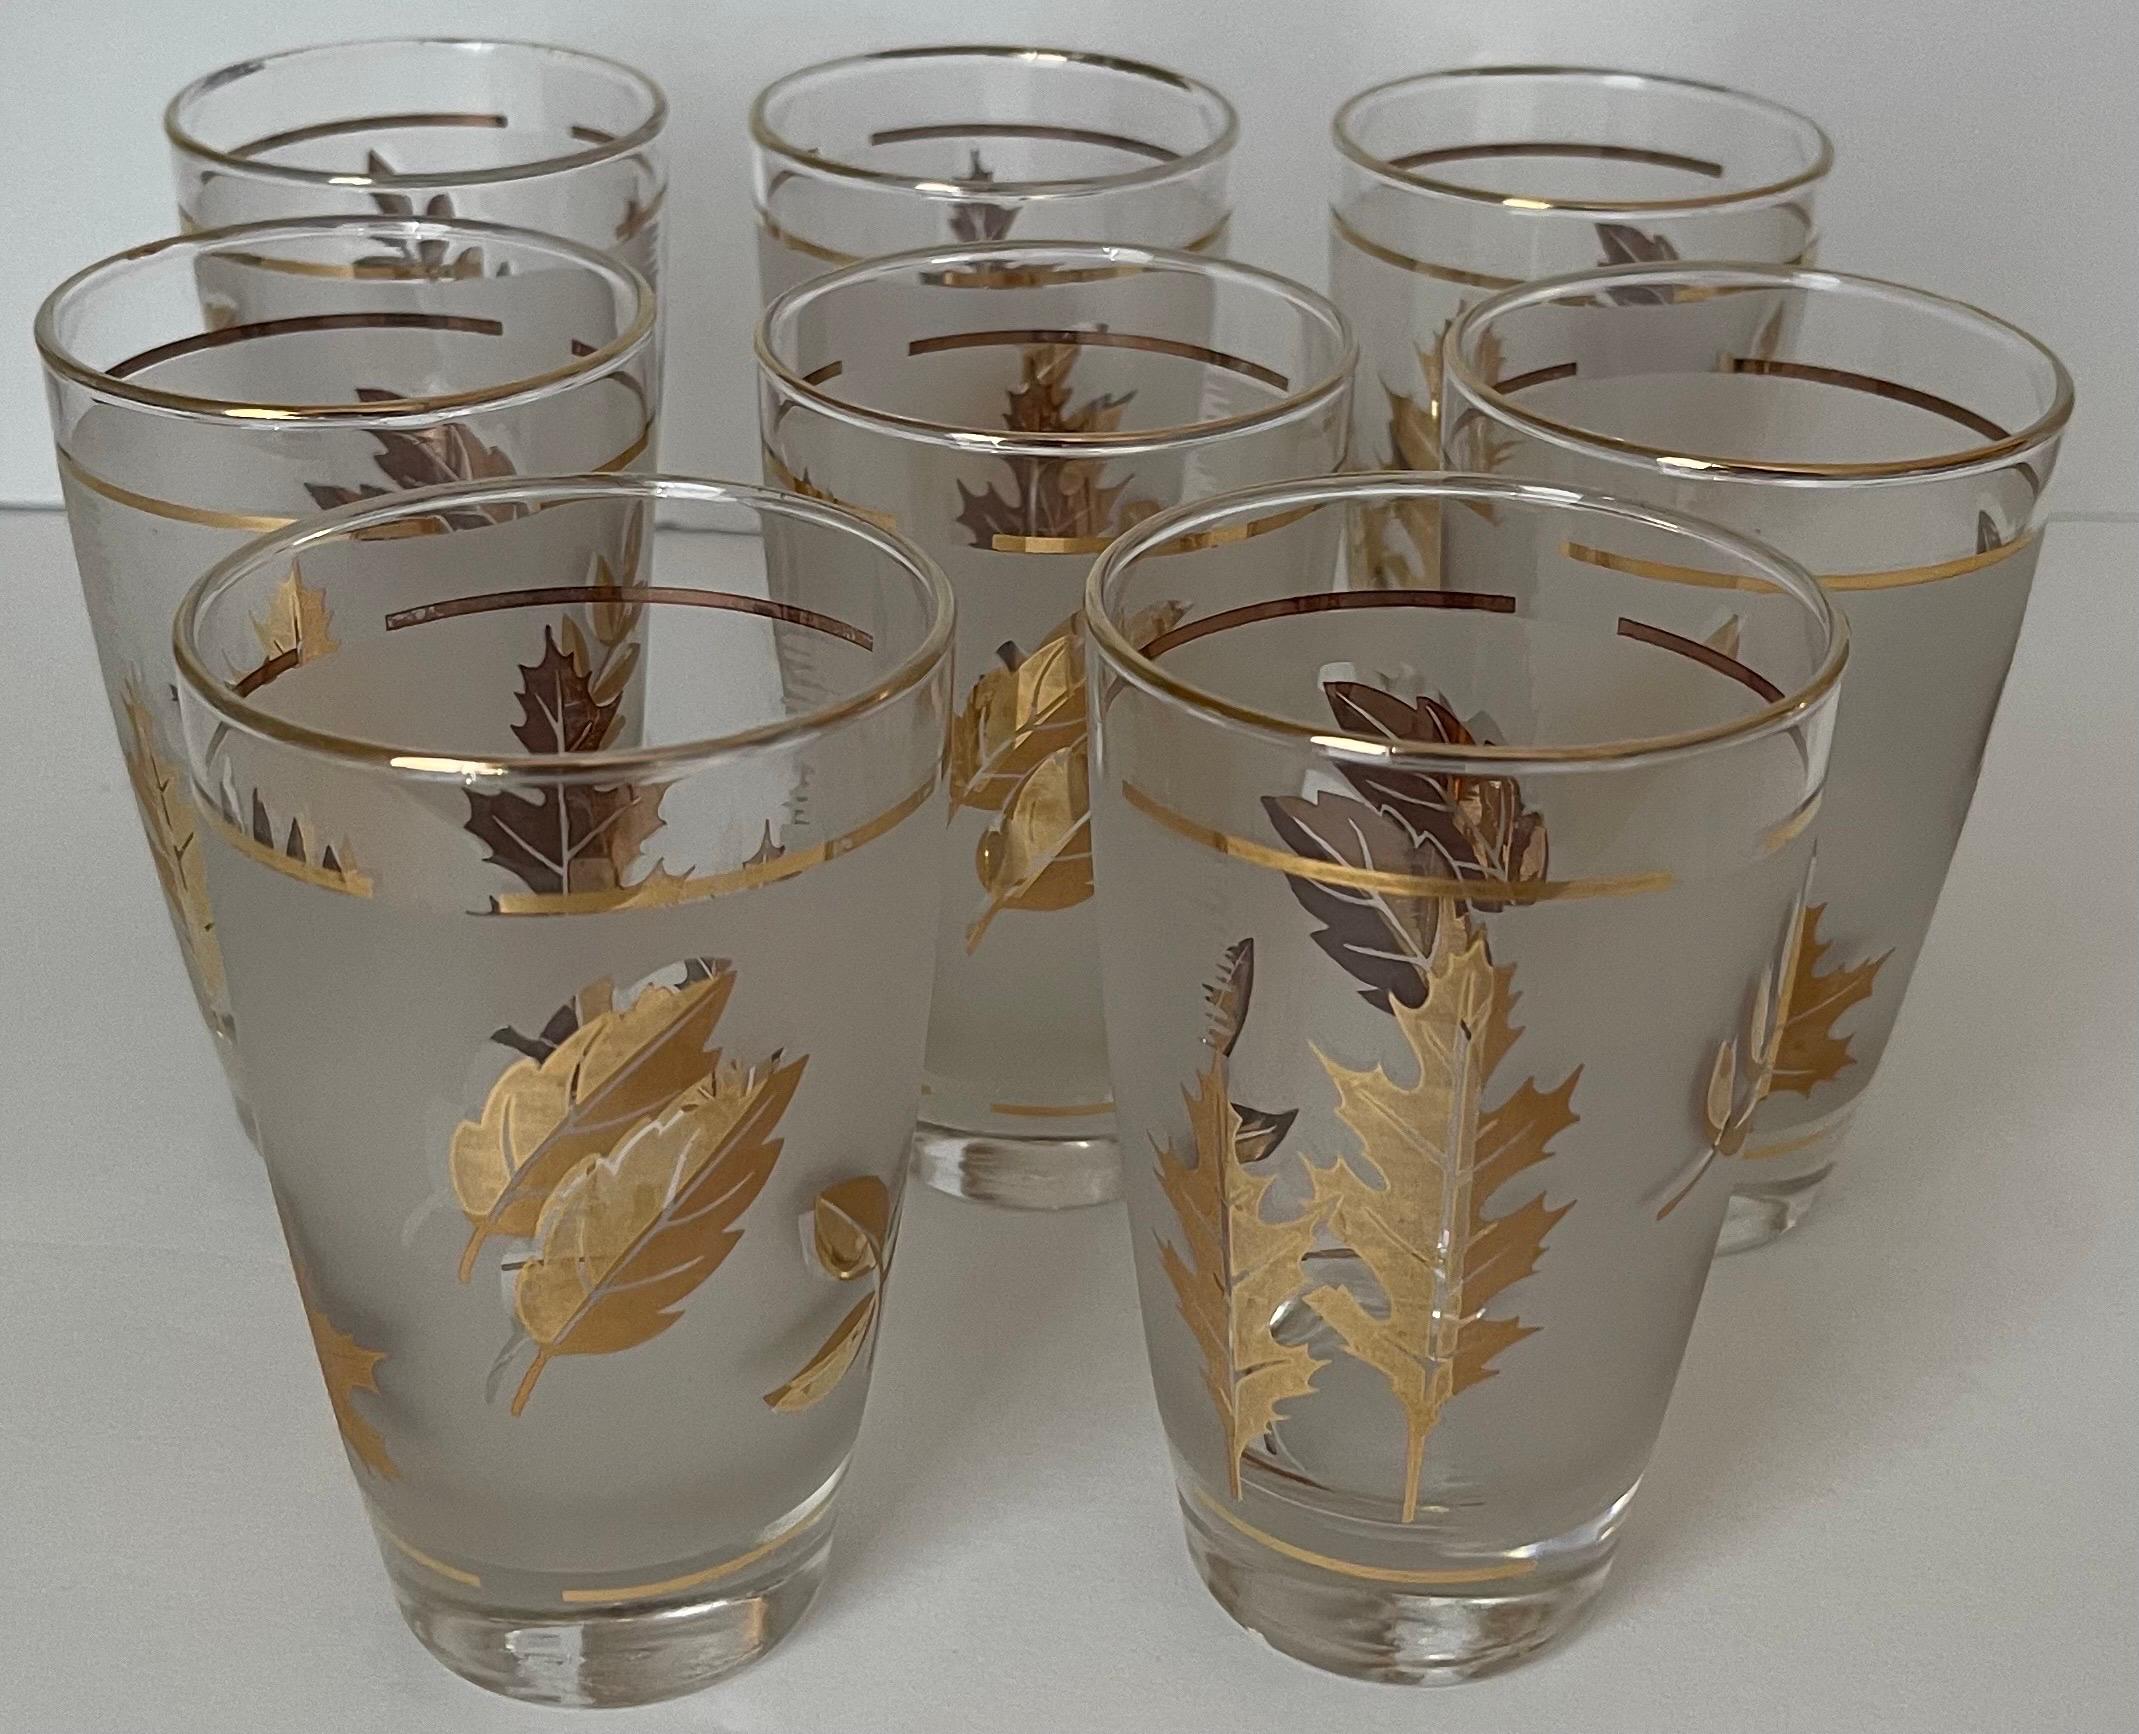 Golden Foliage Leaf Highball Glasses Set of 8 and Ice Bucket by Libby Glass 1